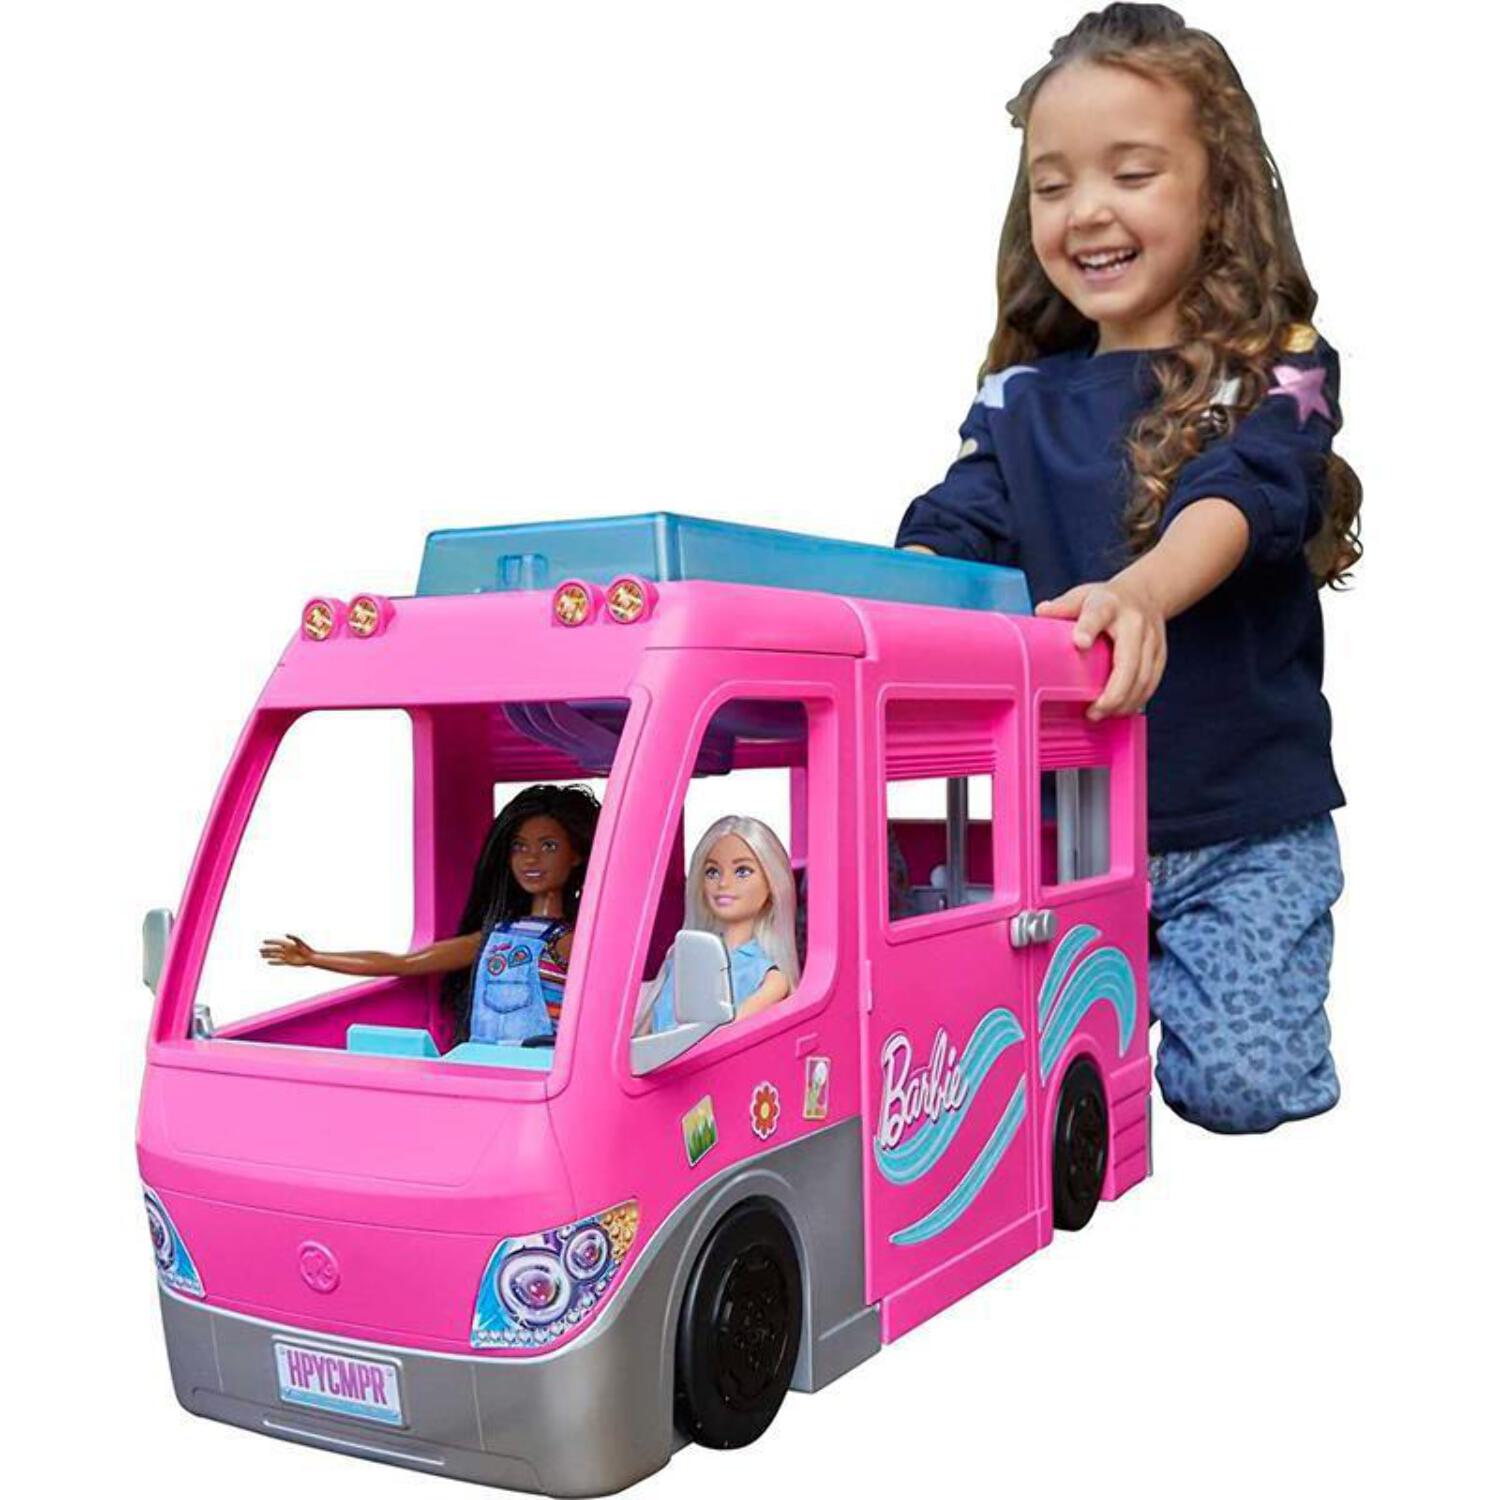 Barbie Doll DreamCamper Van Playset with Pets, Pool, Slide & Accessories, Toys For Ages 3 Years Old & up - image 1 of 9